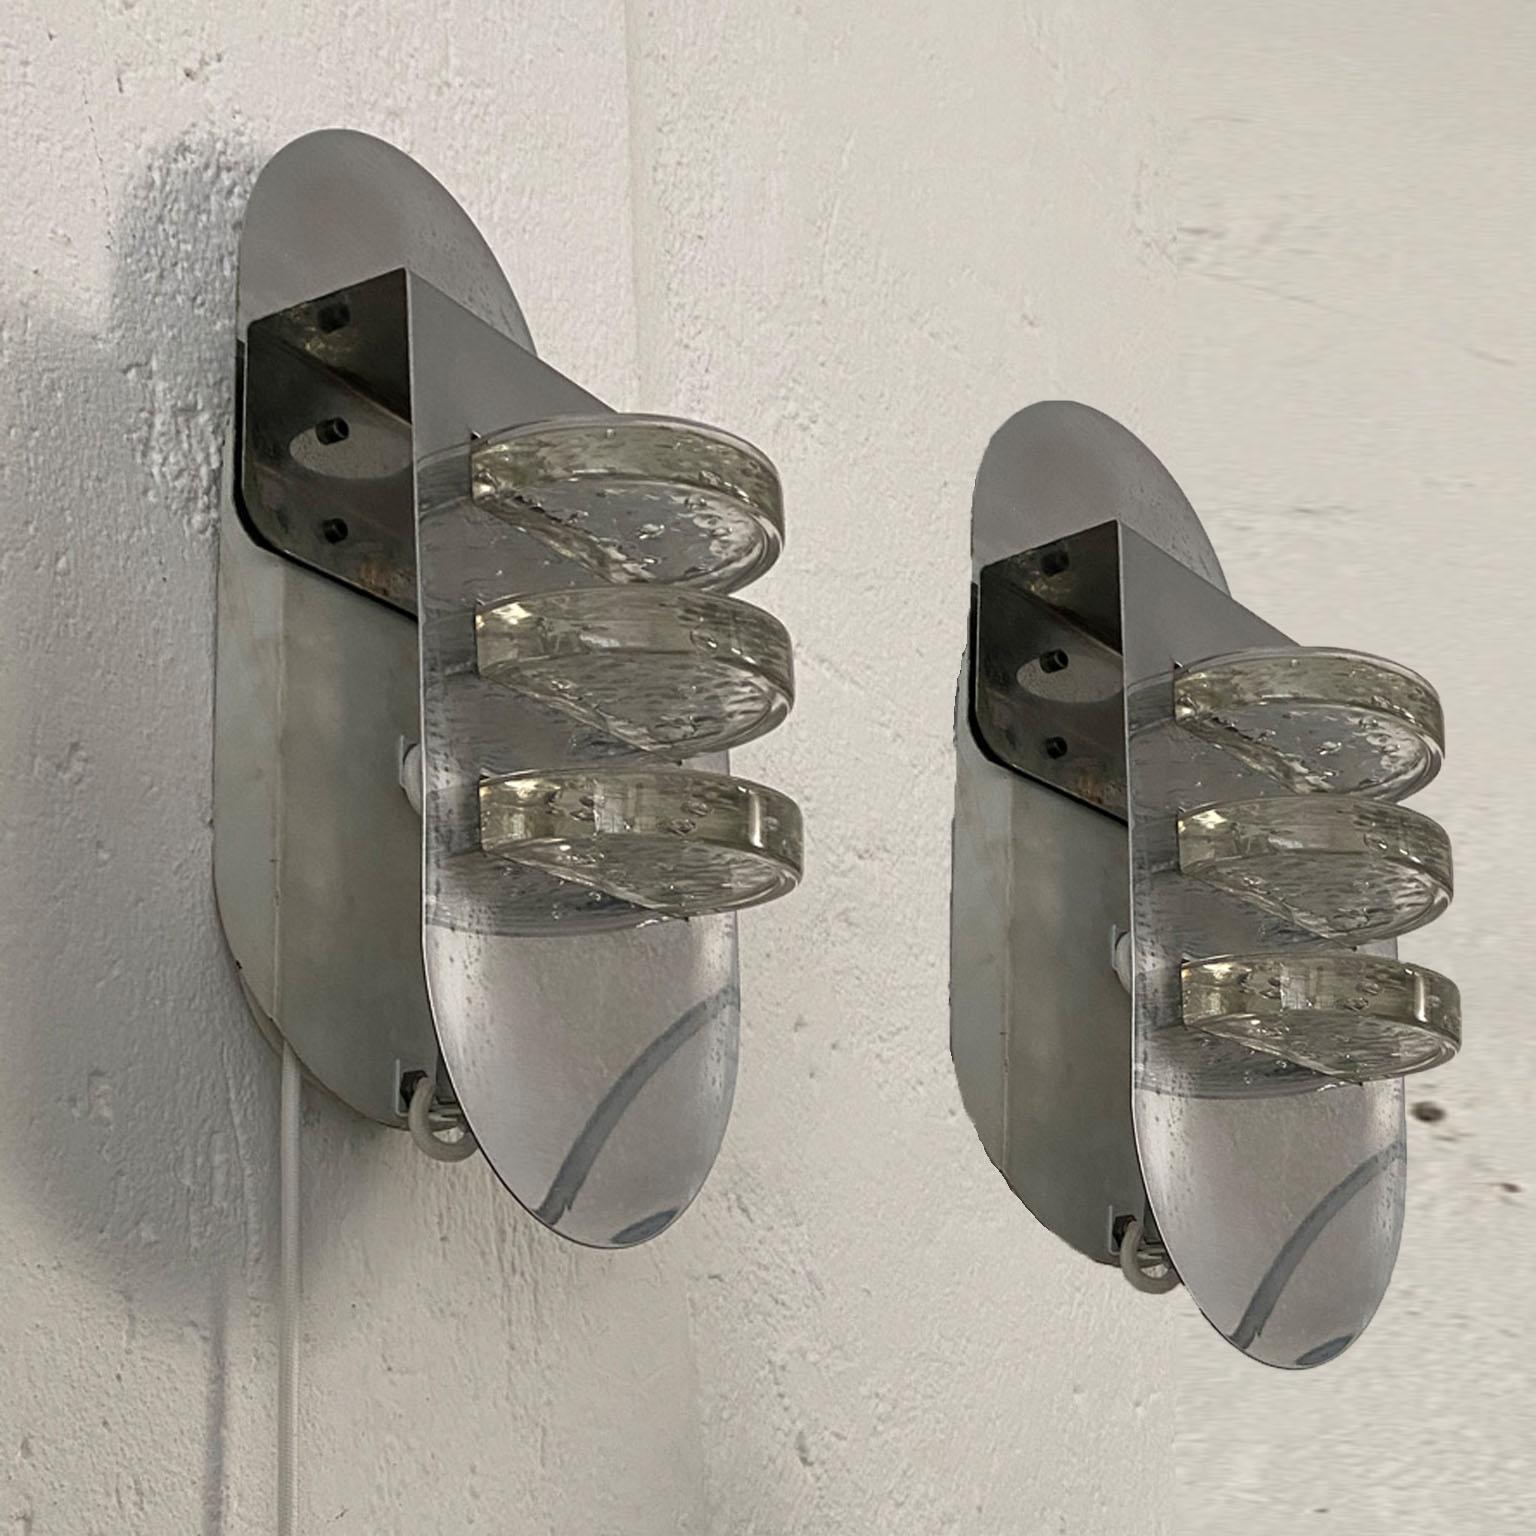 This is a rare pair of anonymous yet very fascinating wall sconces from the 1970s. Crafted in chromed metal and corrugated Murano glass, each lamp holds three transparent glass discs with included bubbles. The light effect is very peculiar, thanks